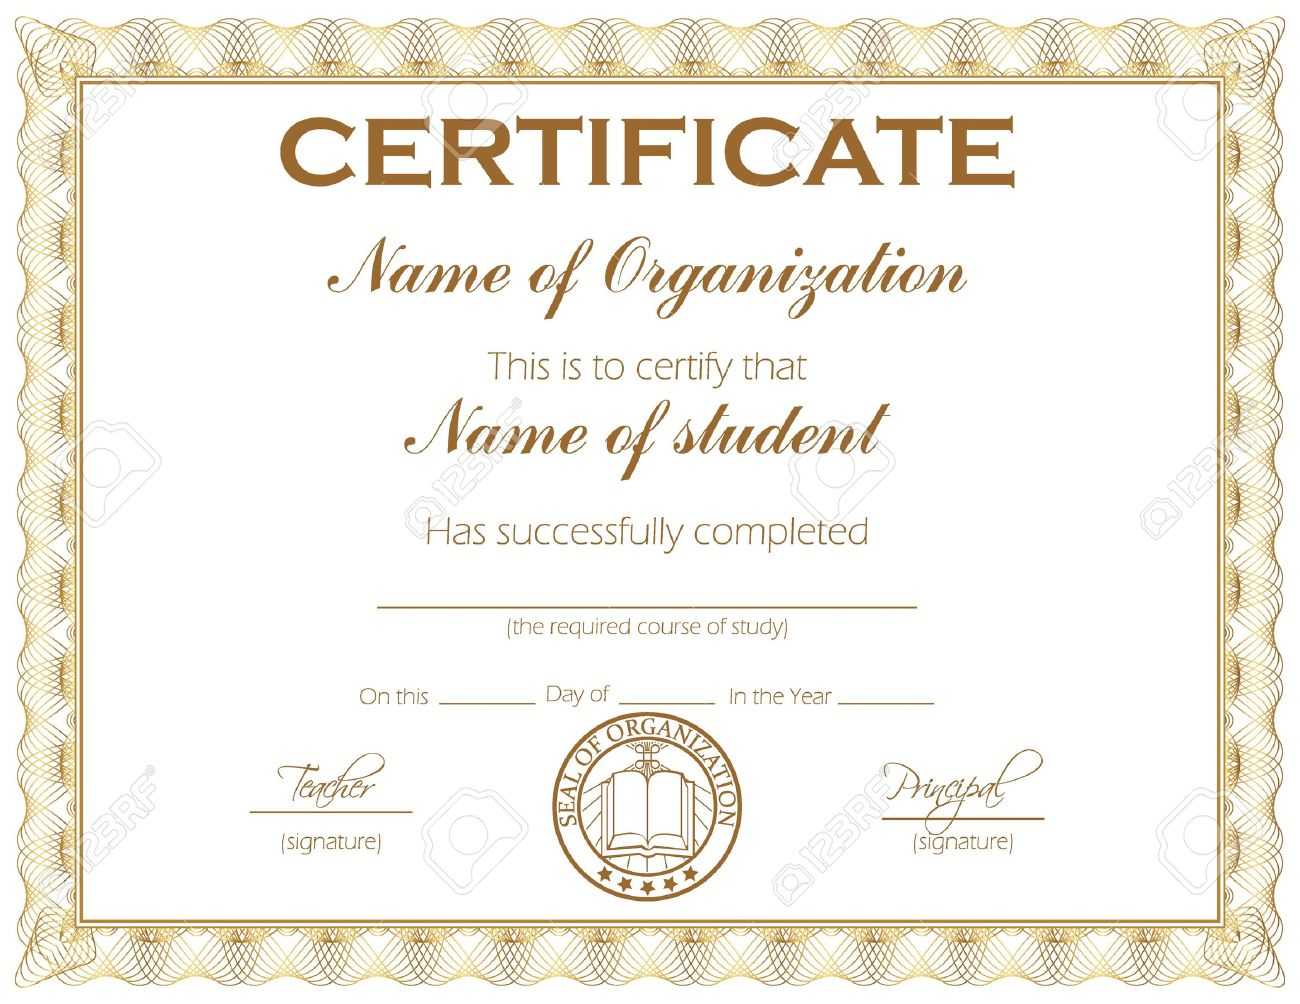 General Purpose Certificate Or Award With Sample Text That Can.. With Regard To Template For Certificate Of Award